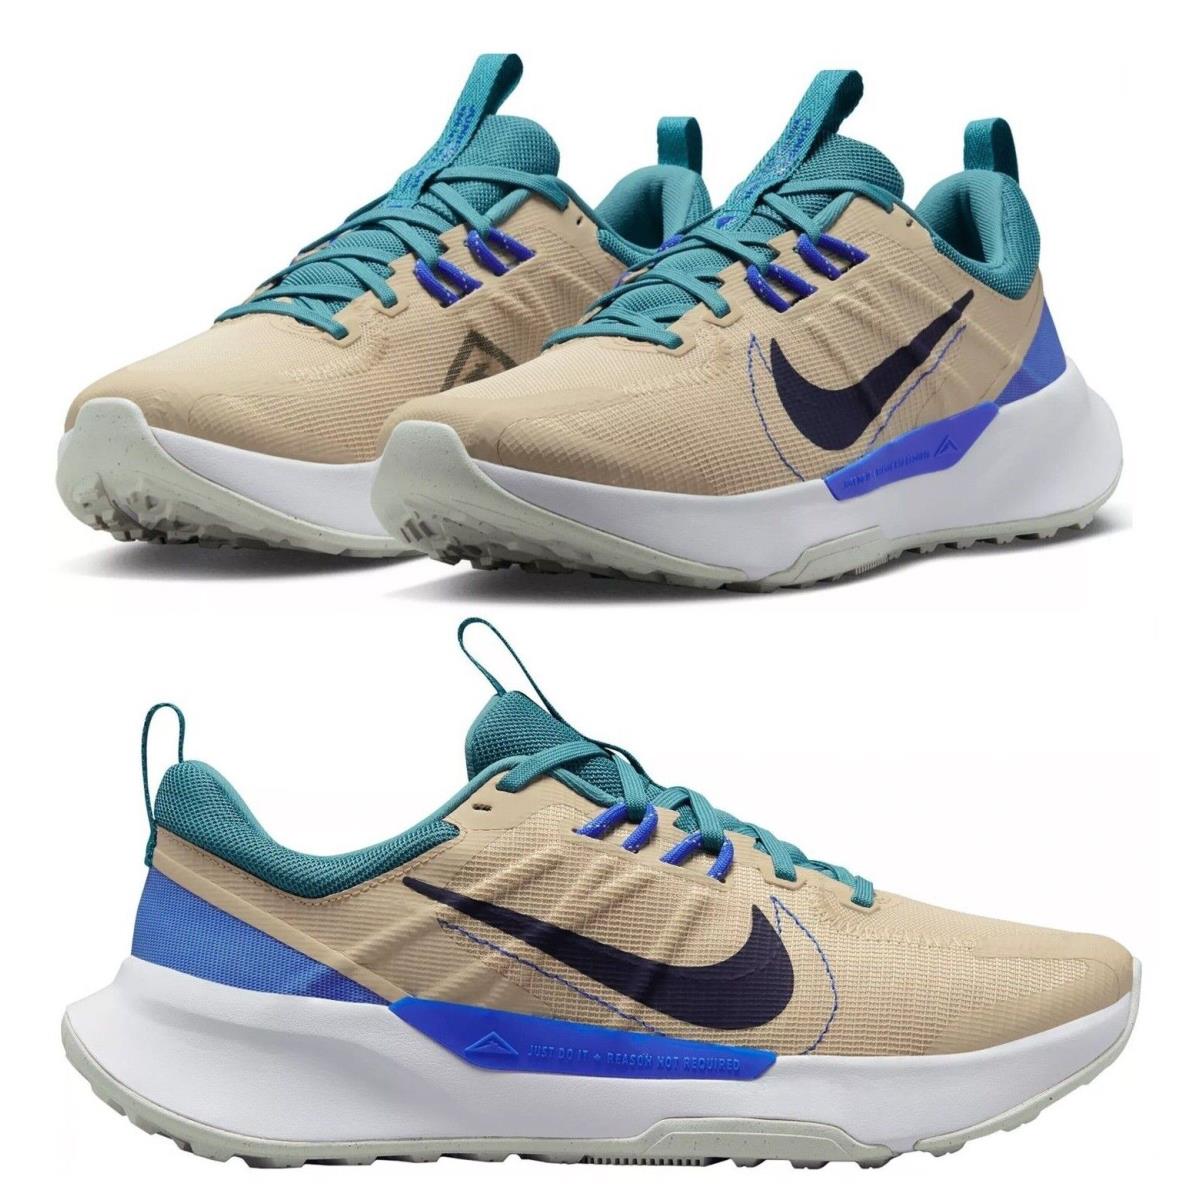 Nike Juniper Trail Athletic Sneakers Running Shoes Mens Beige All Sizes